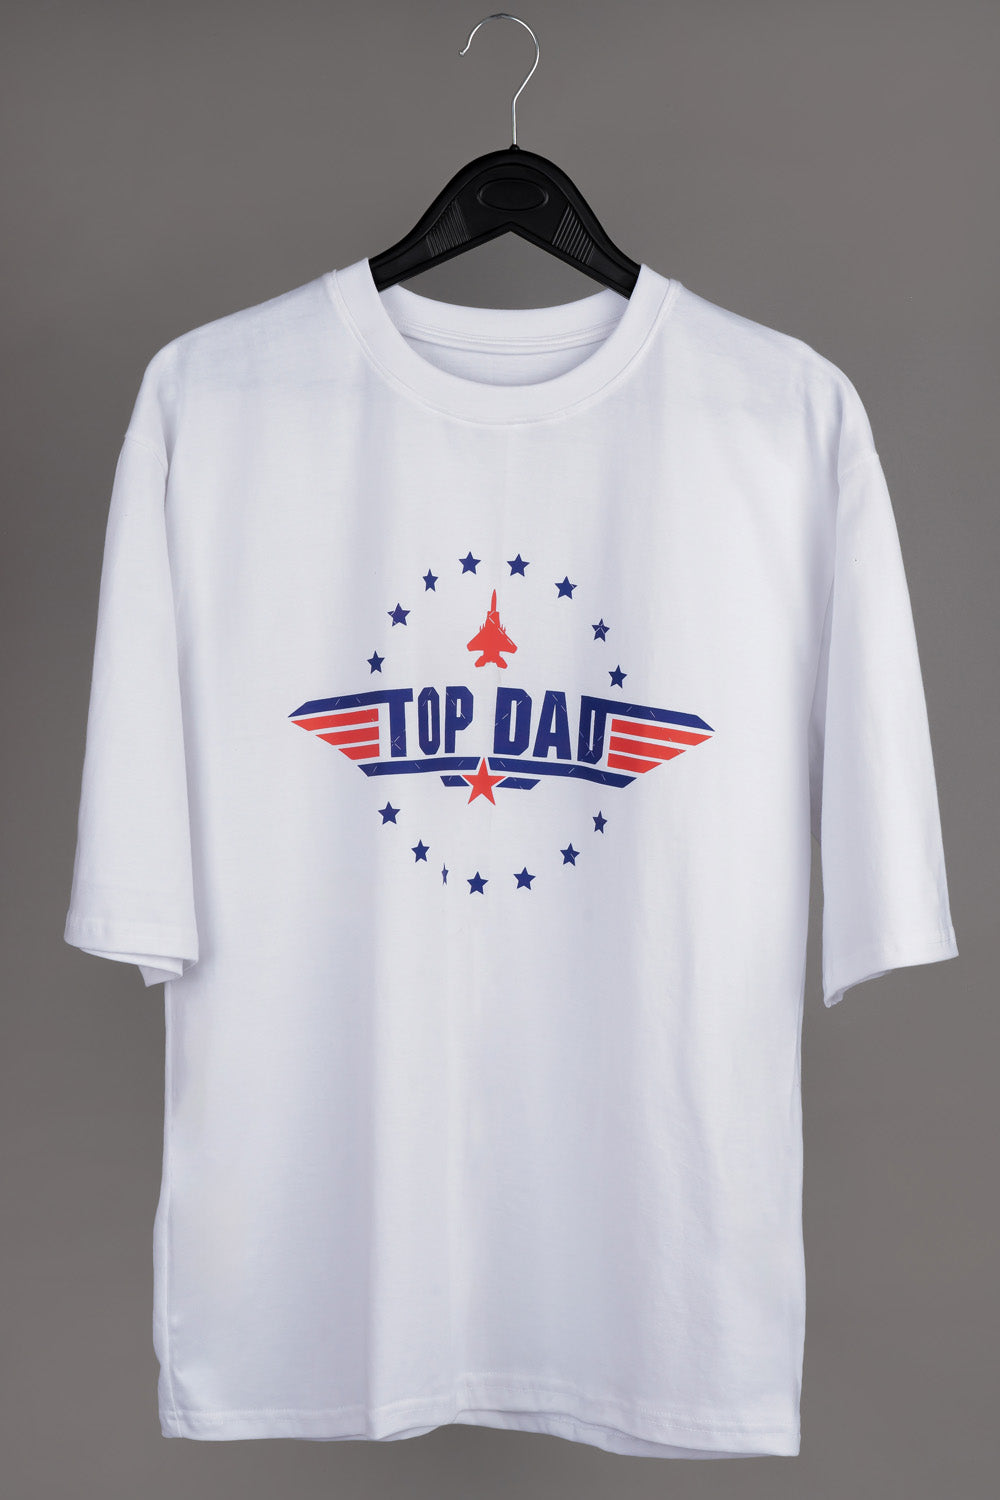 Top dad print over-sized t-shirt